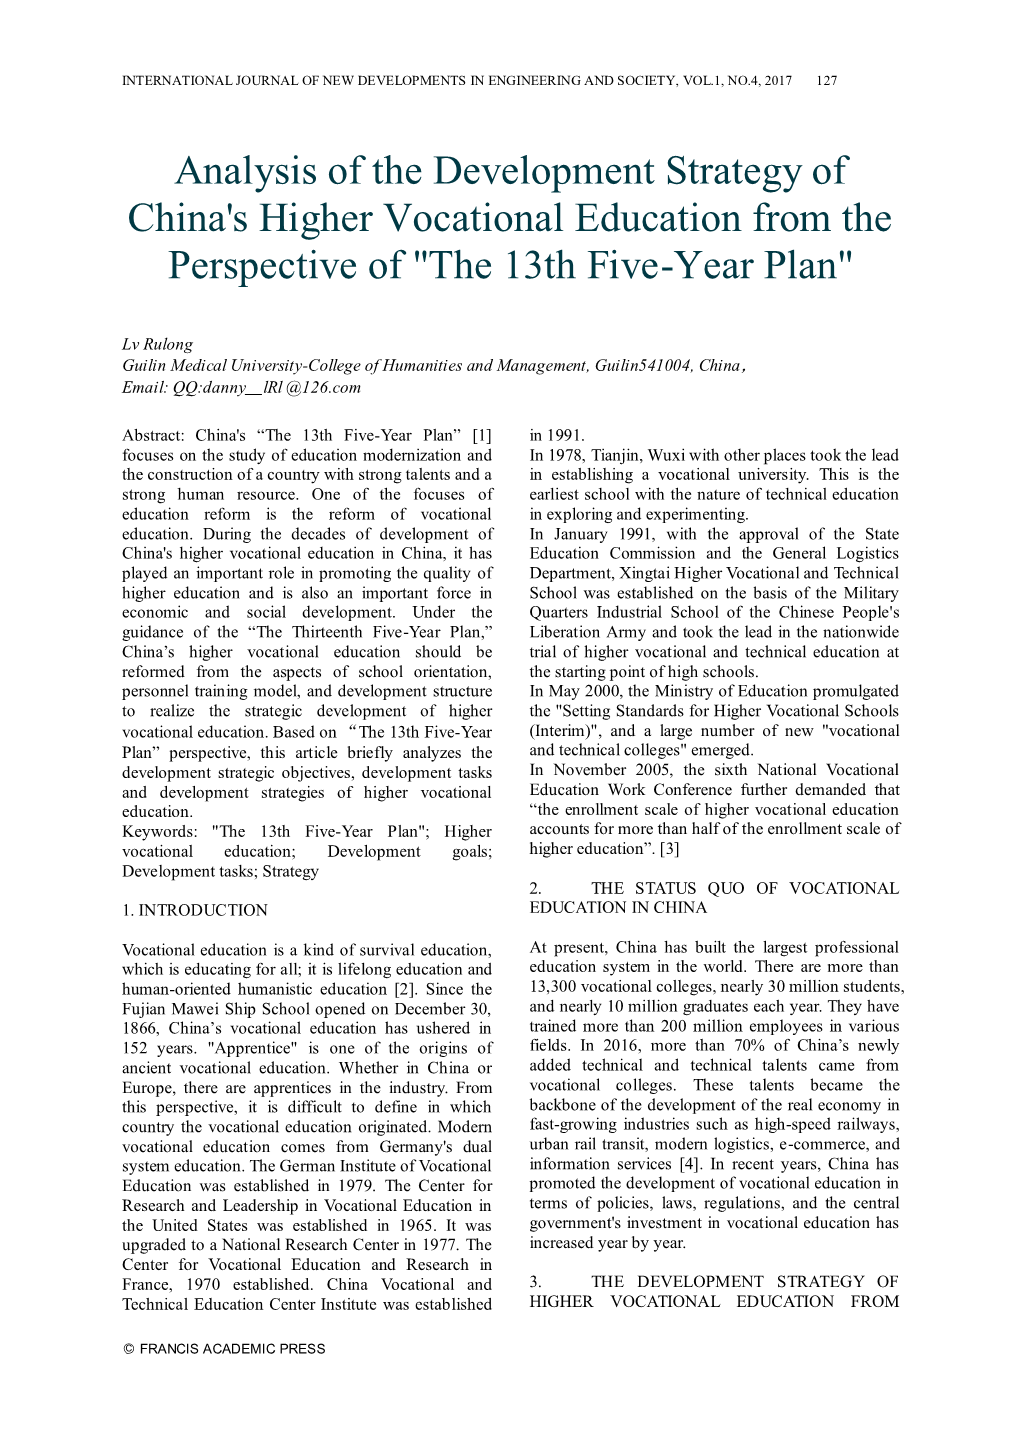 Analysis of the Development Strategy of China's Higher Vocational Education from the Perspective of "The 13Th Five-Year Plan"